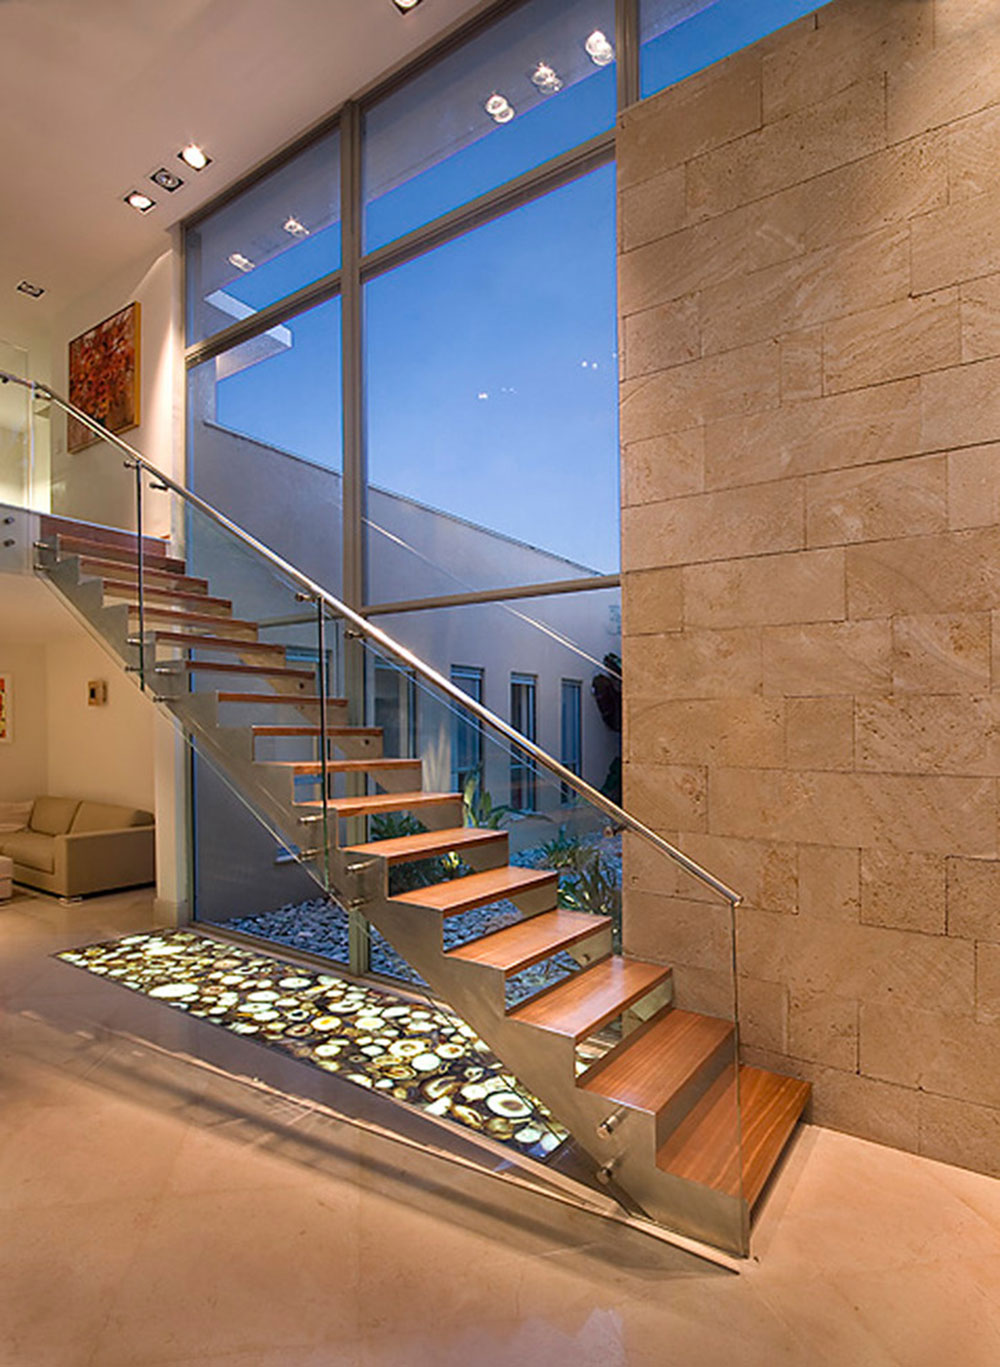 Modern-And-Exquisite-Floating-Staircase3 Modern And Exquisite Floating Staircase Designs